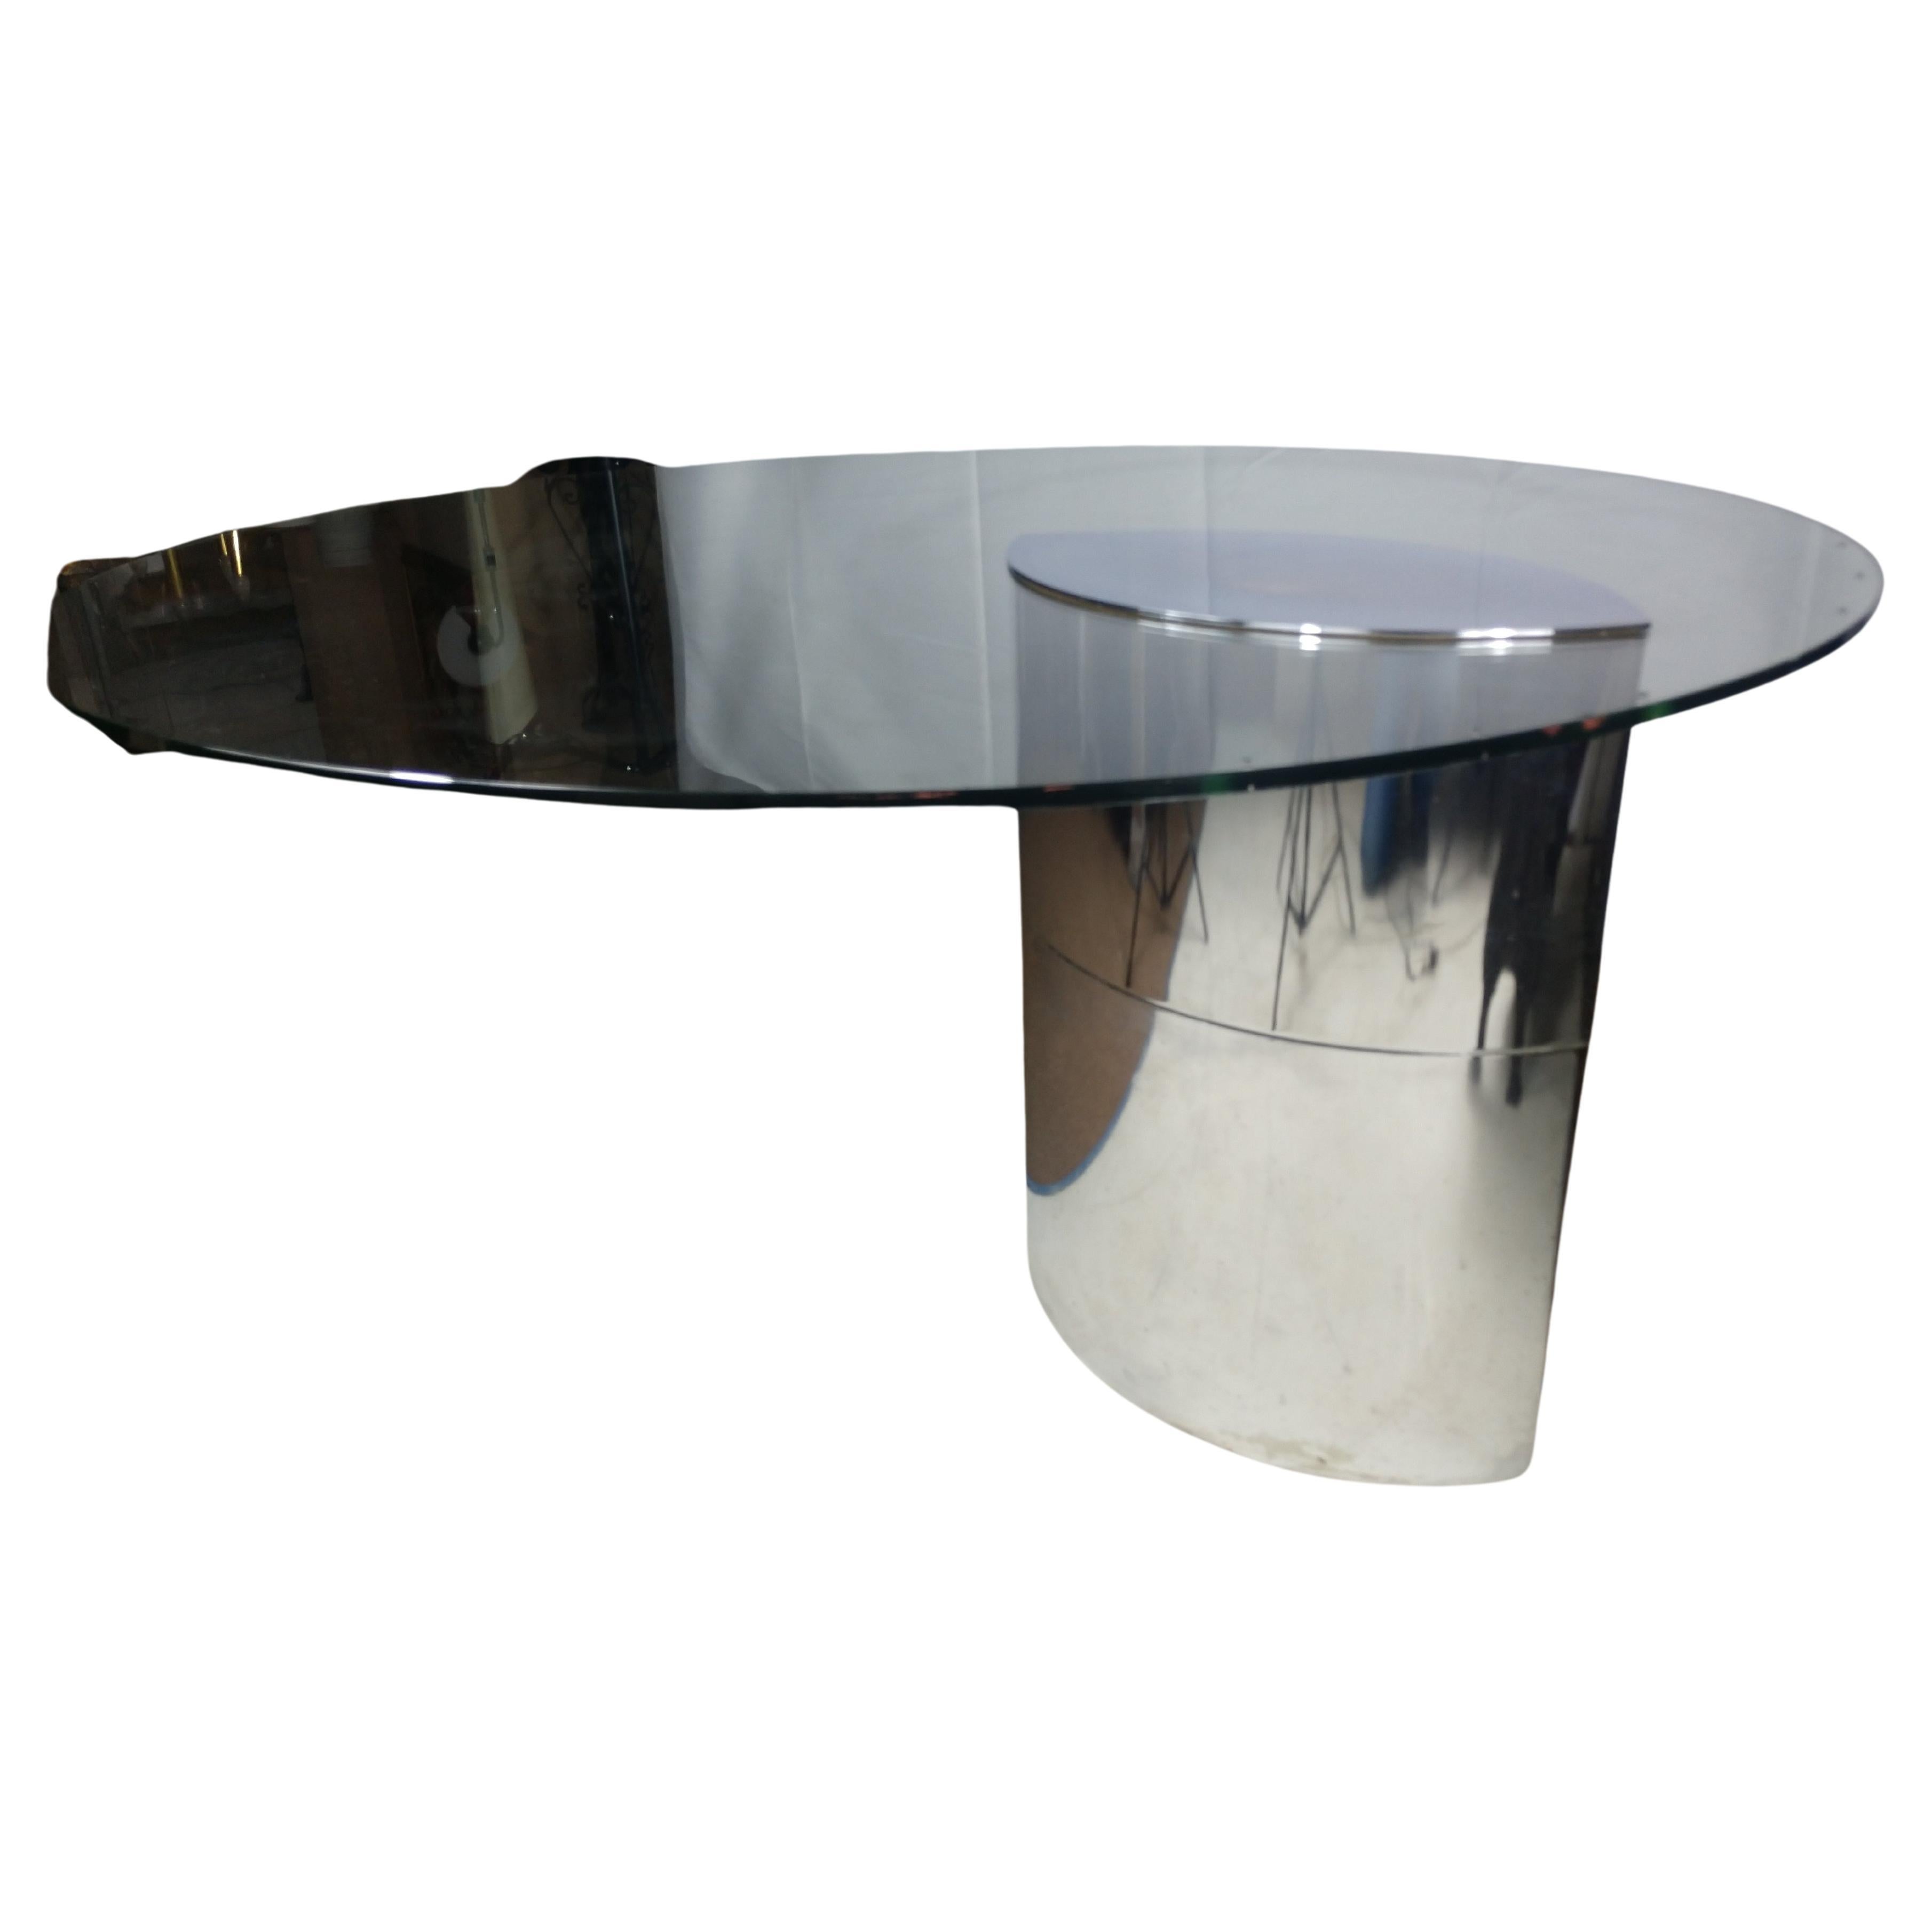 Modernist Cini Boeri for Knoll International Dining Table Desk In Good Condition For Sale In Port Jervis, NY